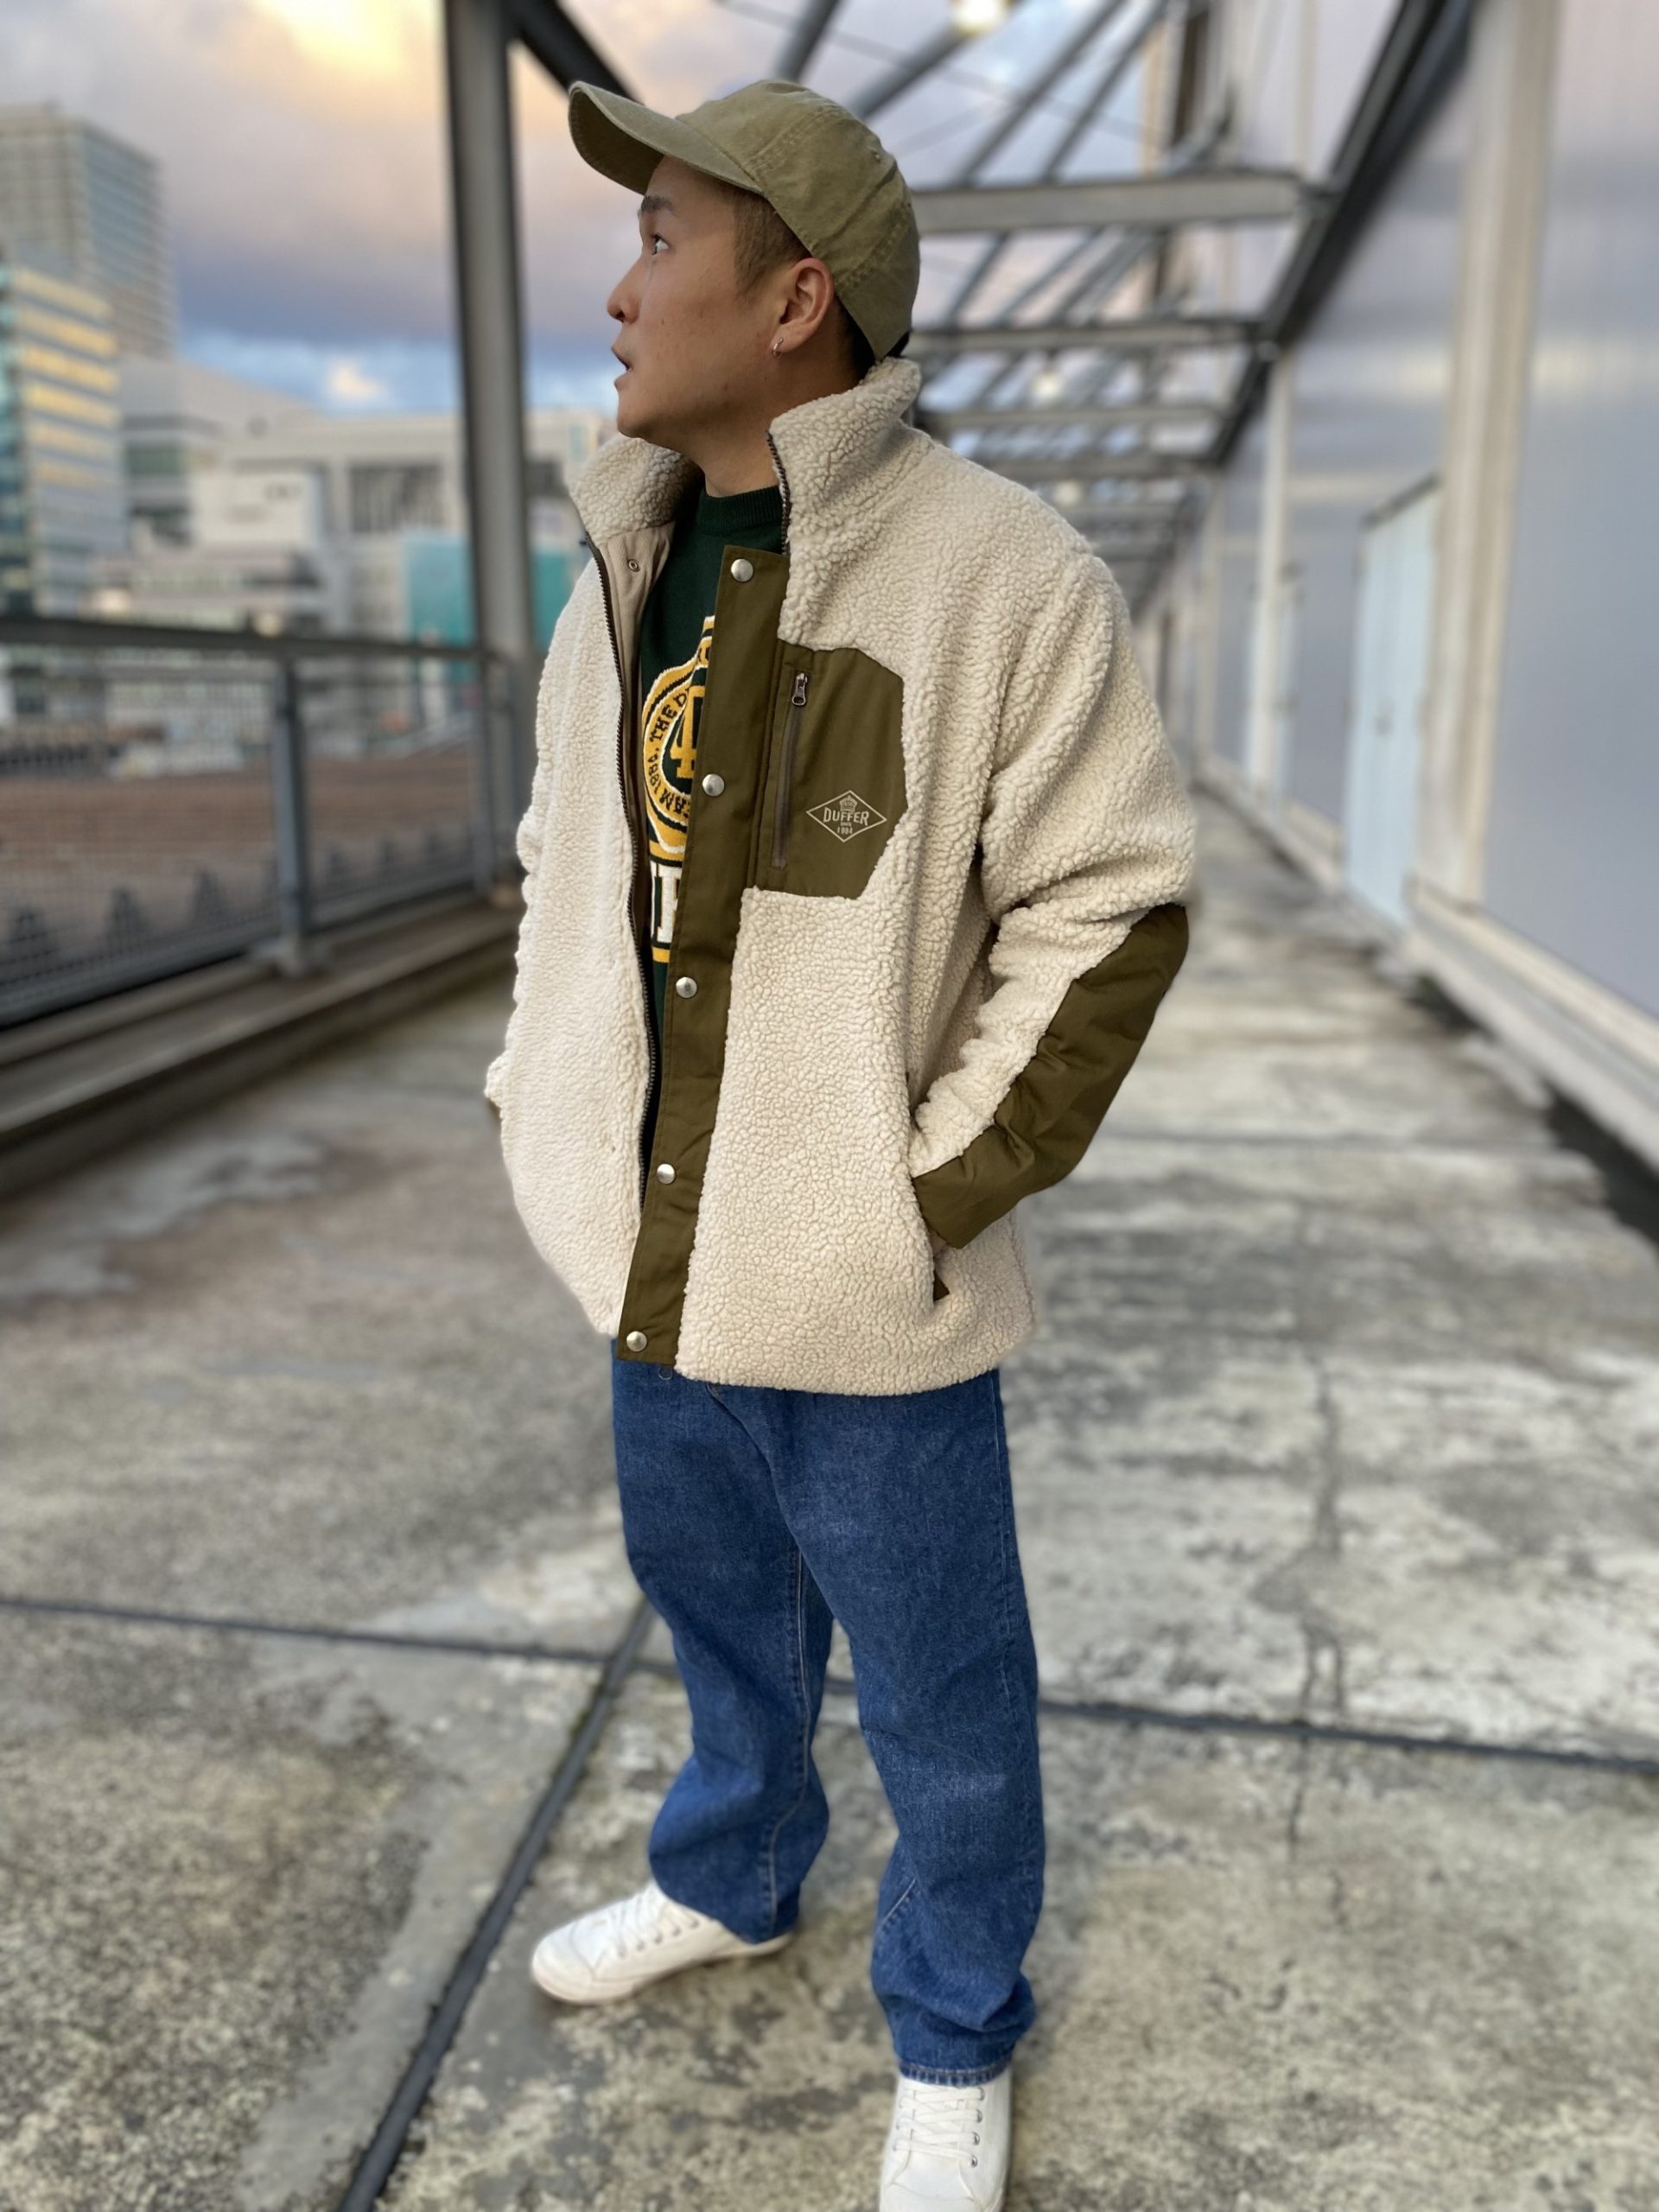 DUFFER FRATERNITY SPORT coordinate2 – The DUFFER of St.GEORGE 